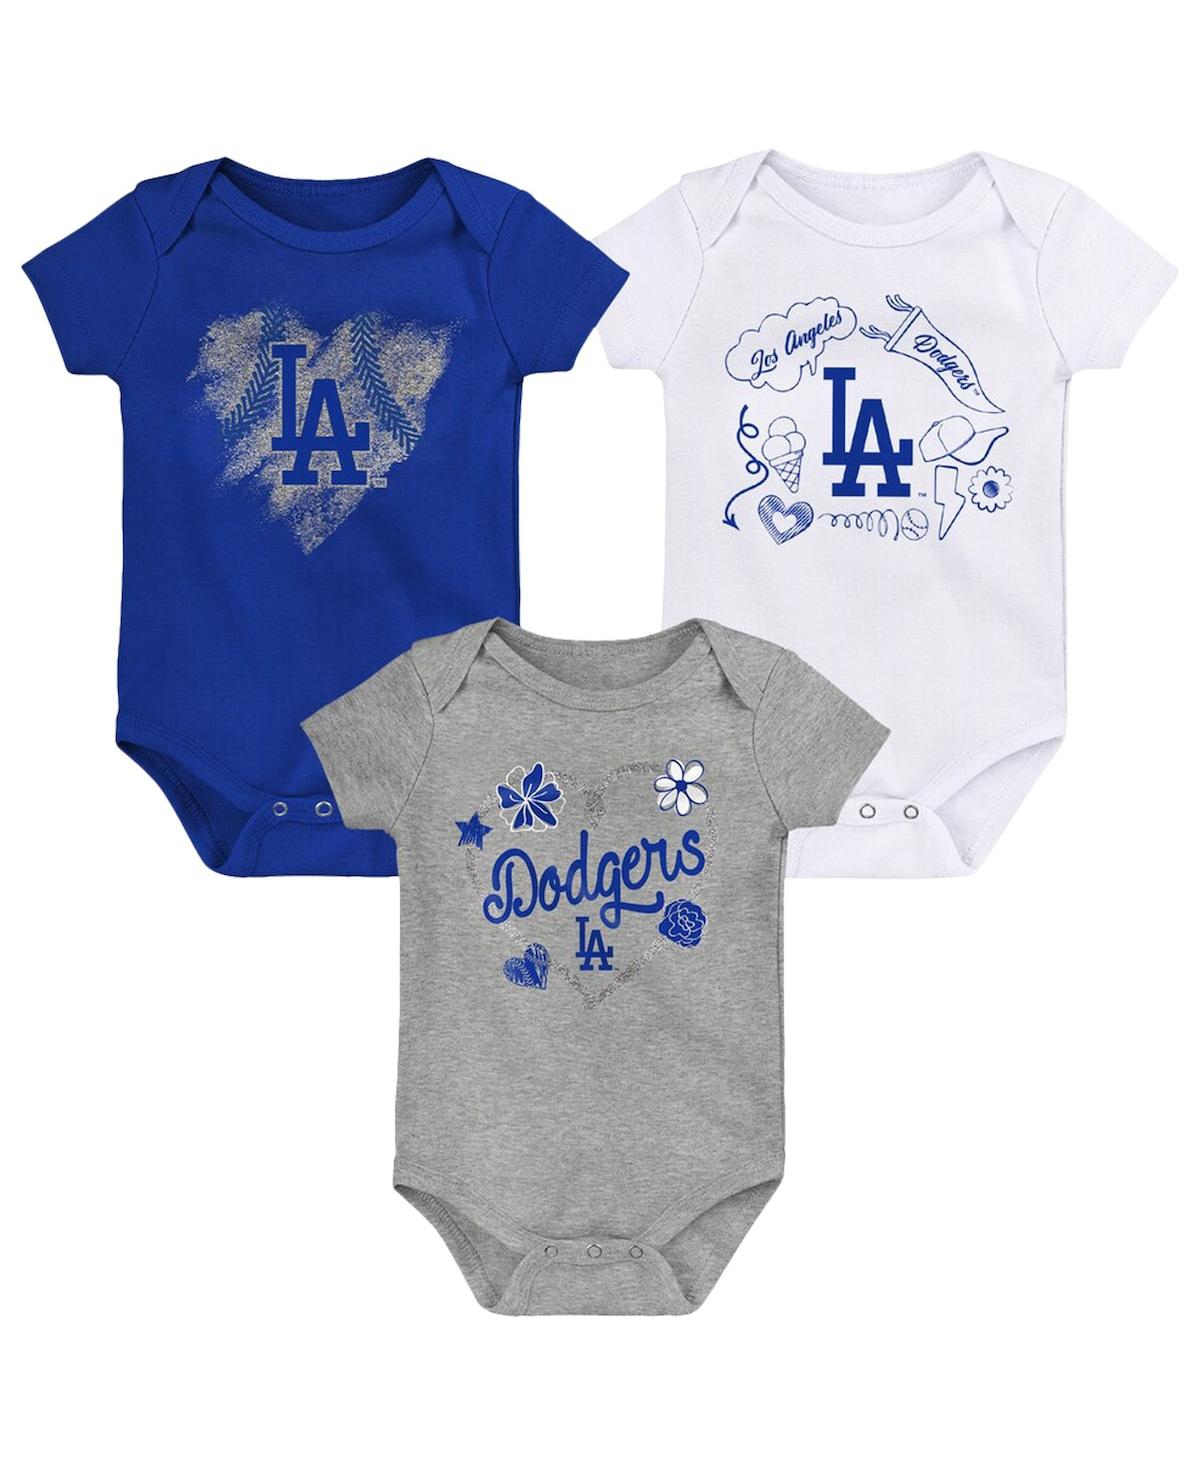 OUTERSTUFF GIRLS NEWBORN AND INFANT ROYAL, WHITE, HEATHERED GRAY LOS ANGELES DODGERS 3-PACK BATTER UP BODYSUIT 